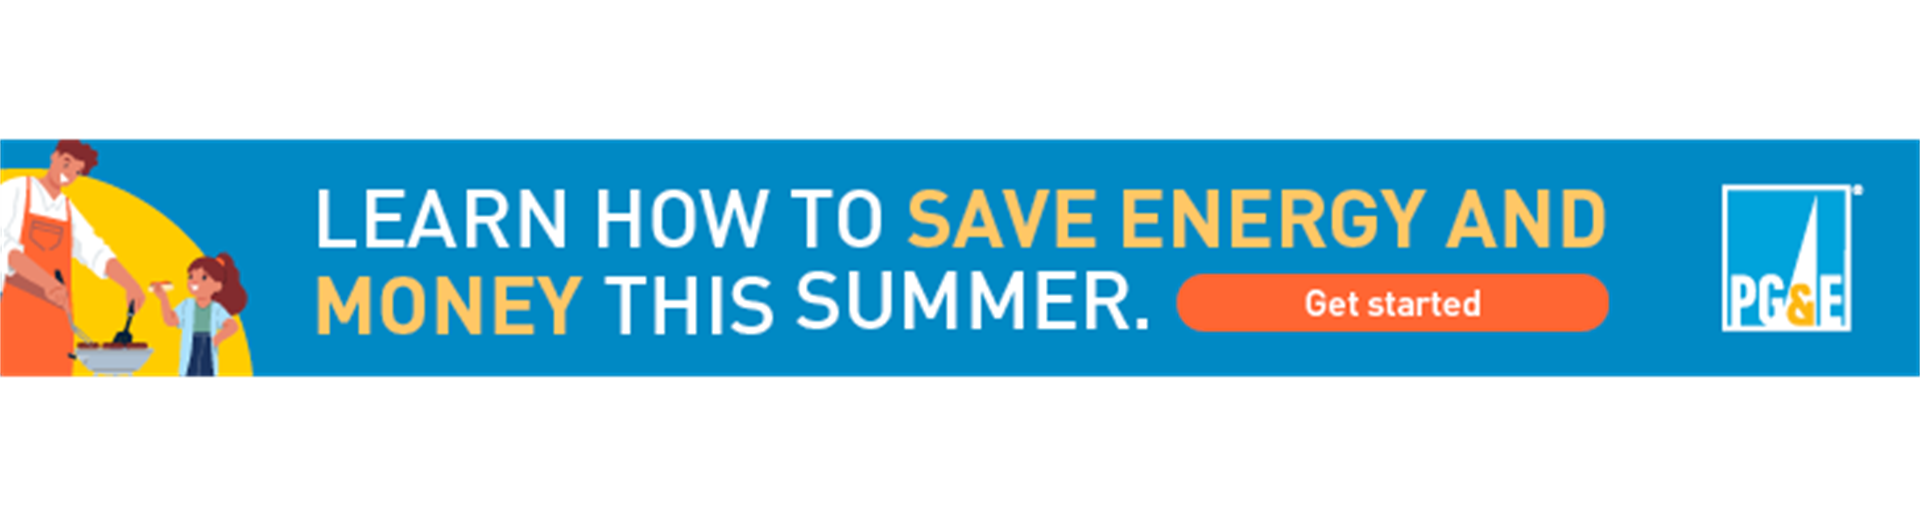 Learn how to save money and energy this summer with PG&E